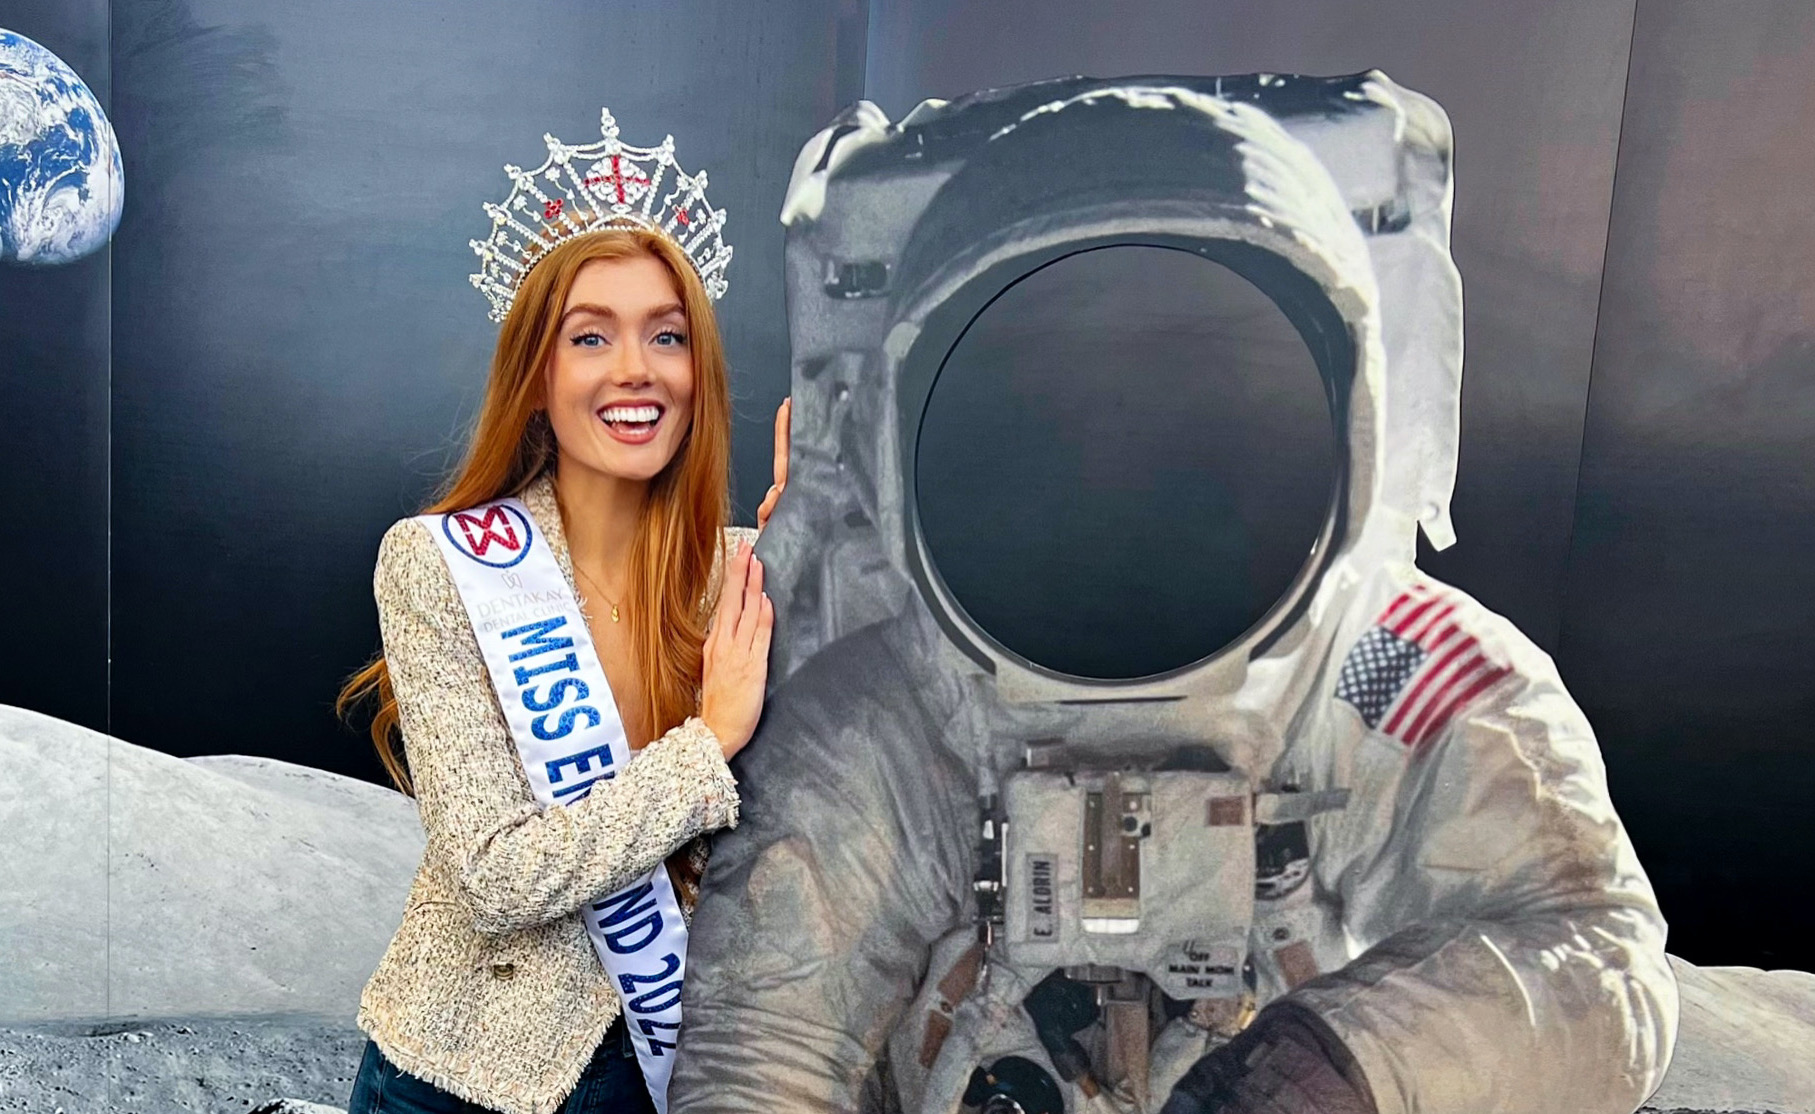 Miss England visits National Space Centre in Leicester